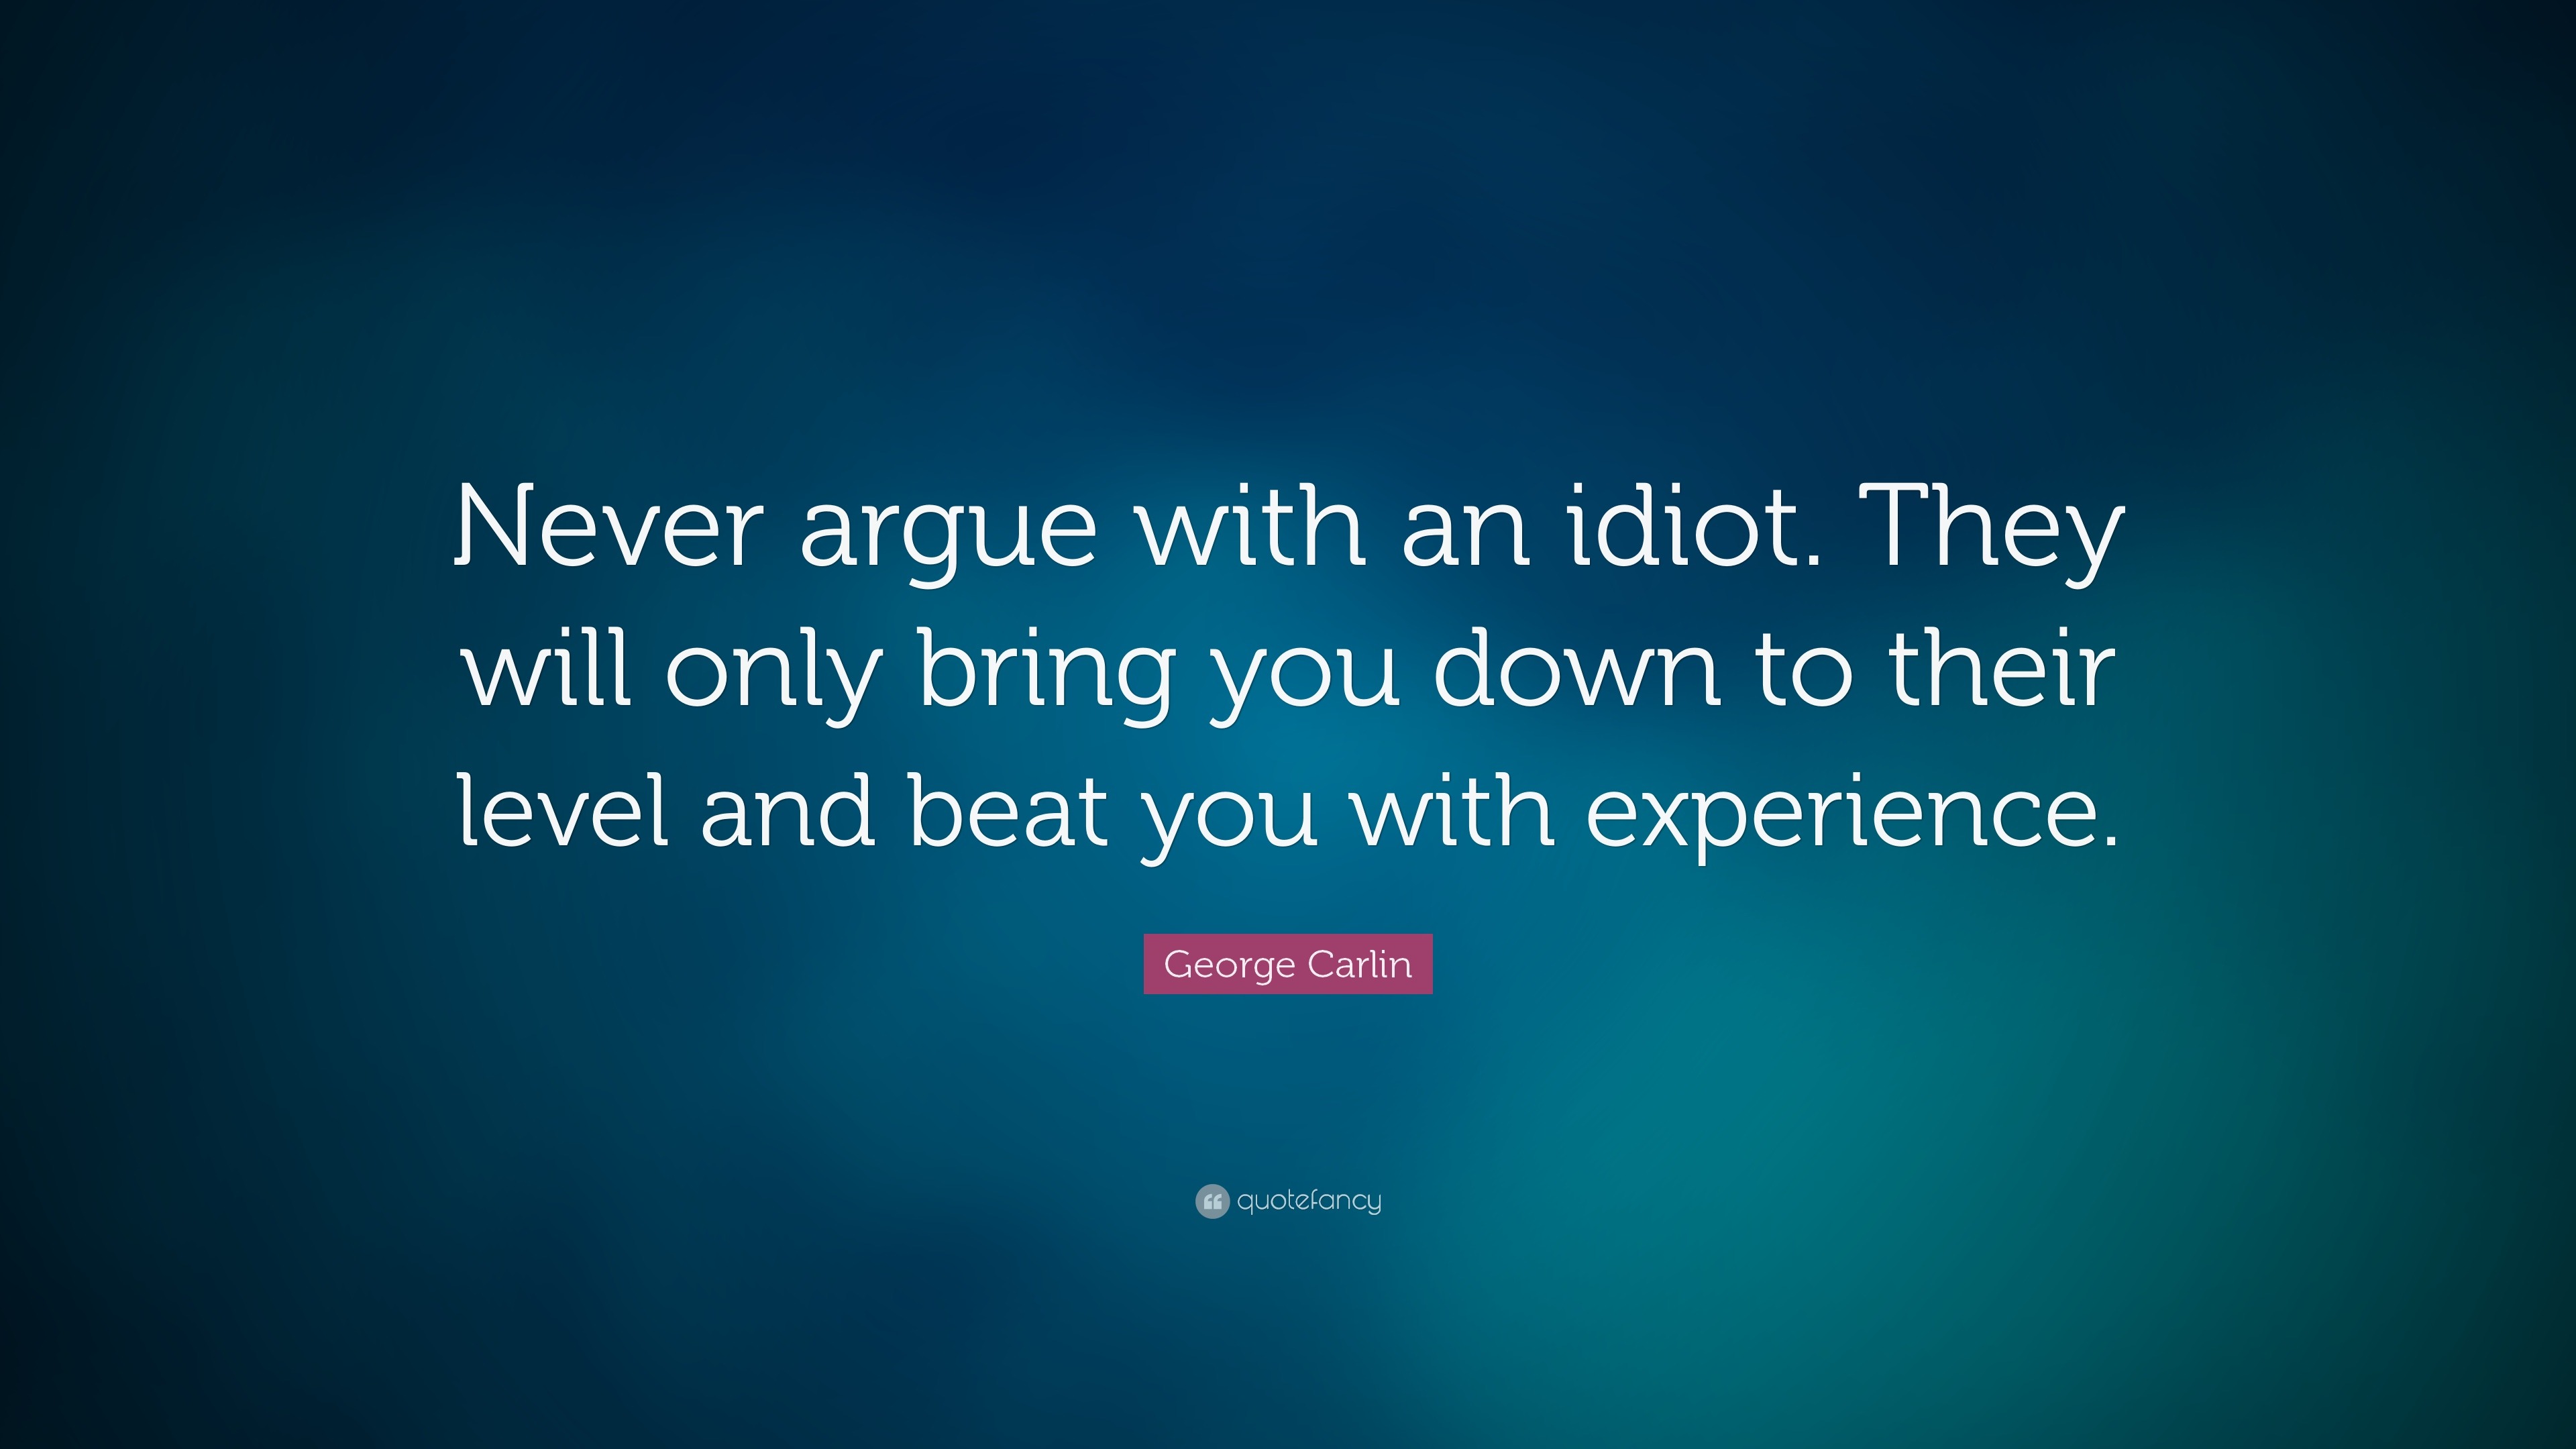 9035-George-Carlin-Quote-Never-argue-with-an-idiot-They-will-only-bring.jpg